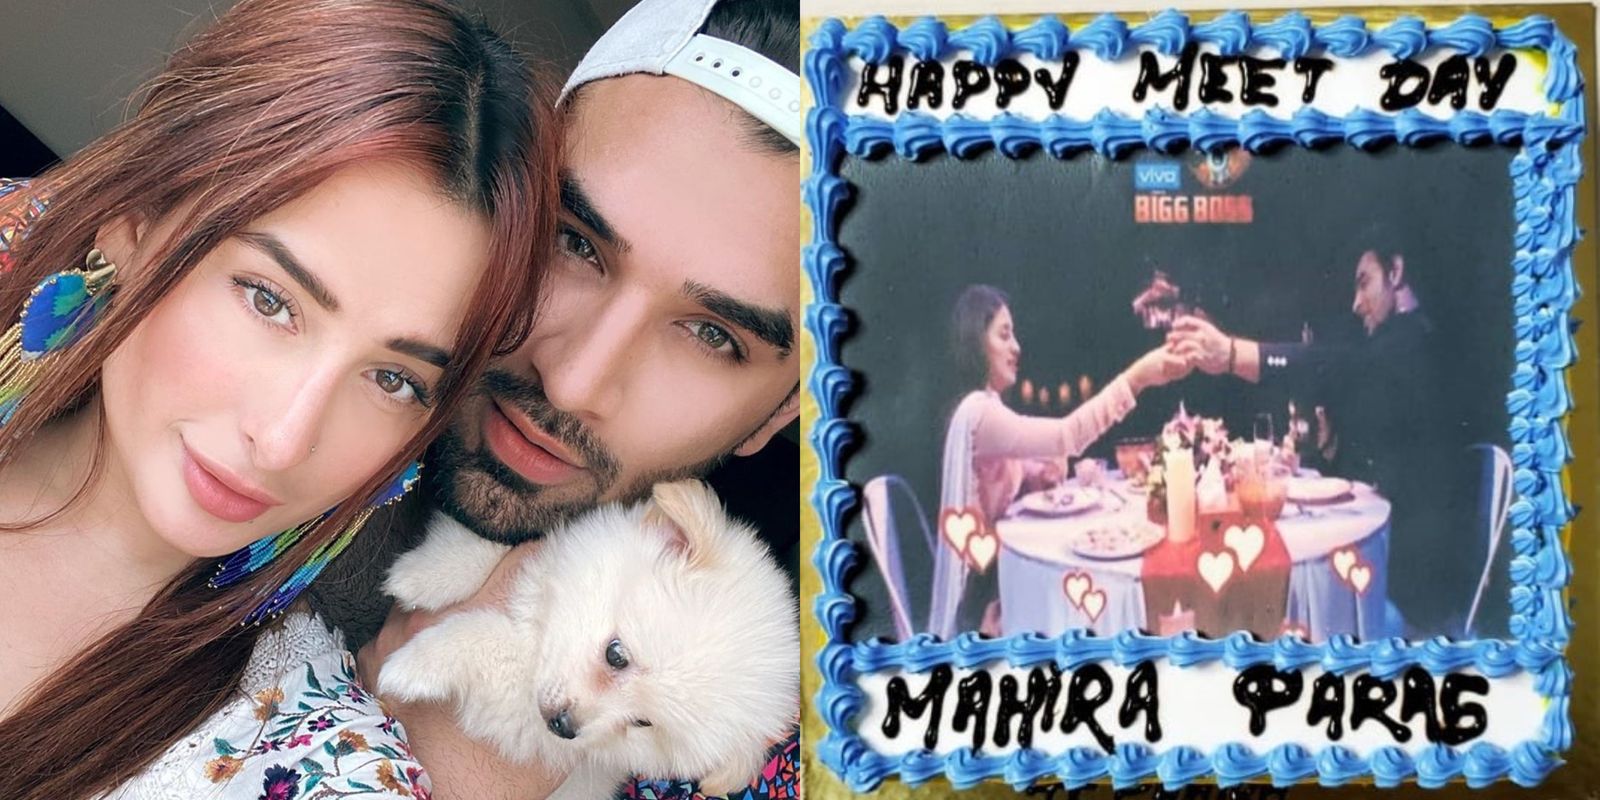 Bigg Boss 13’s Paras Chhabra-Mahira Sharma Celebrate One Year Of The First Time They Met On The Reality Show